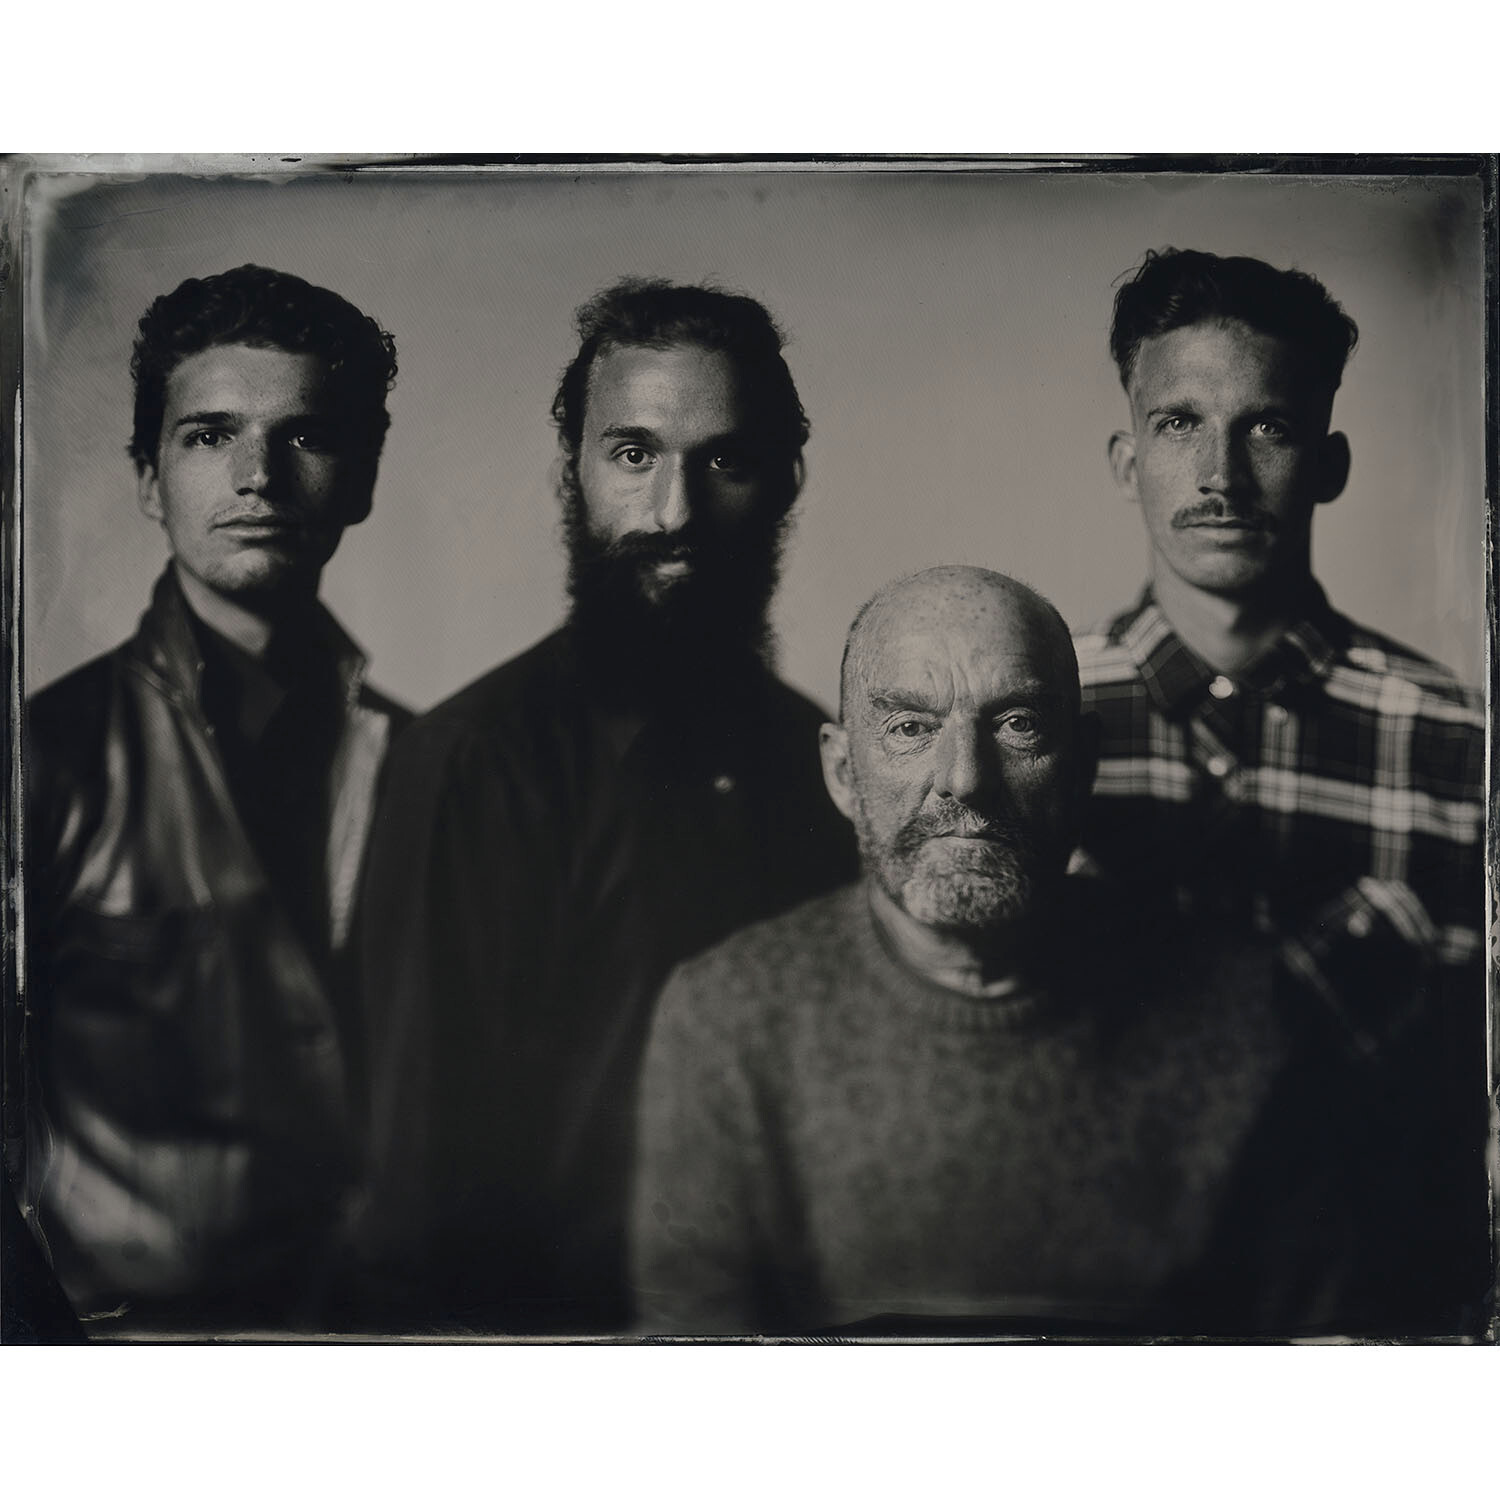 Fam. Bakker-Silver Portrait Store-scan from Wet plate collodion-Tintype 20 x 25 cm.